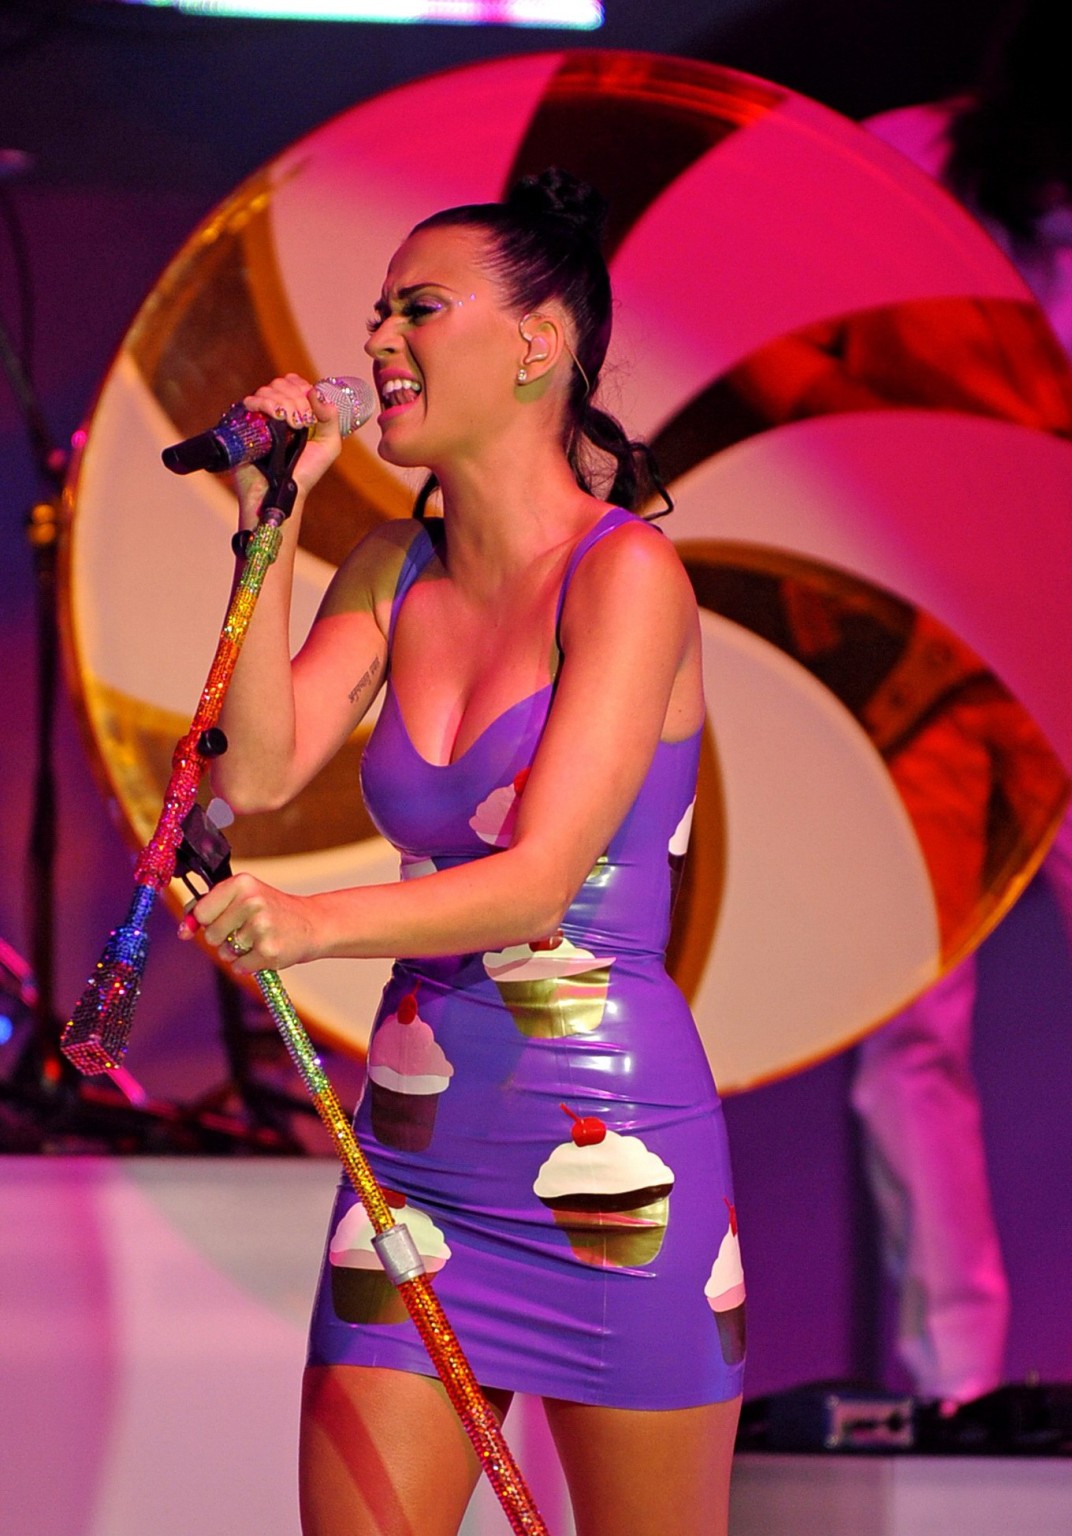 Katy Perry busty in tiny latex dress performing at the Roseland Ballroom in NYC #75327220